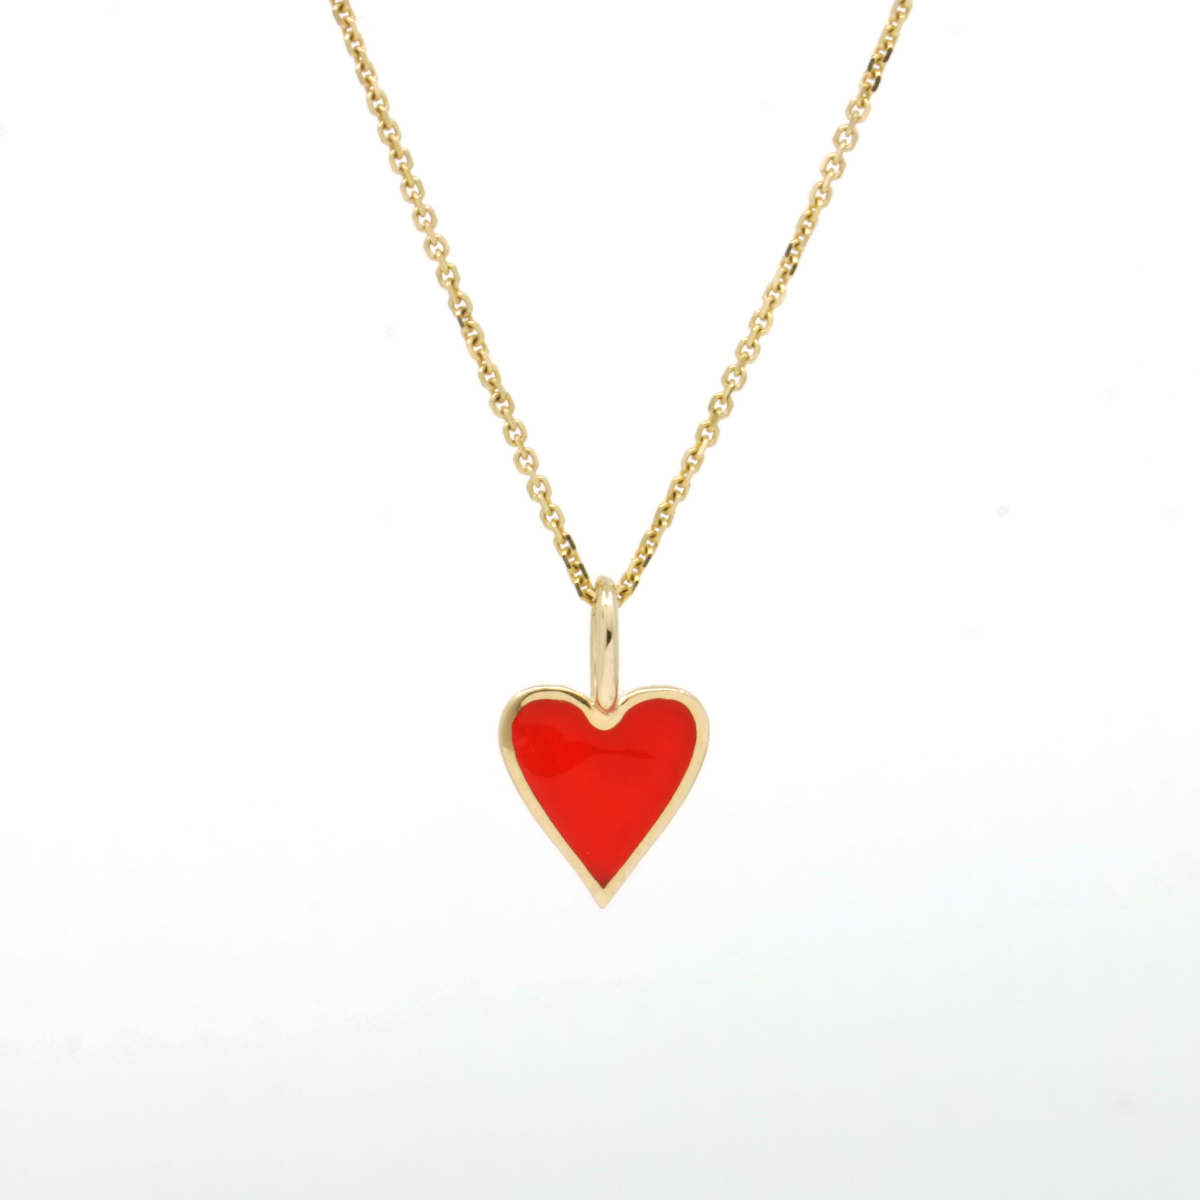 Colored heart necklace